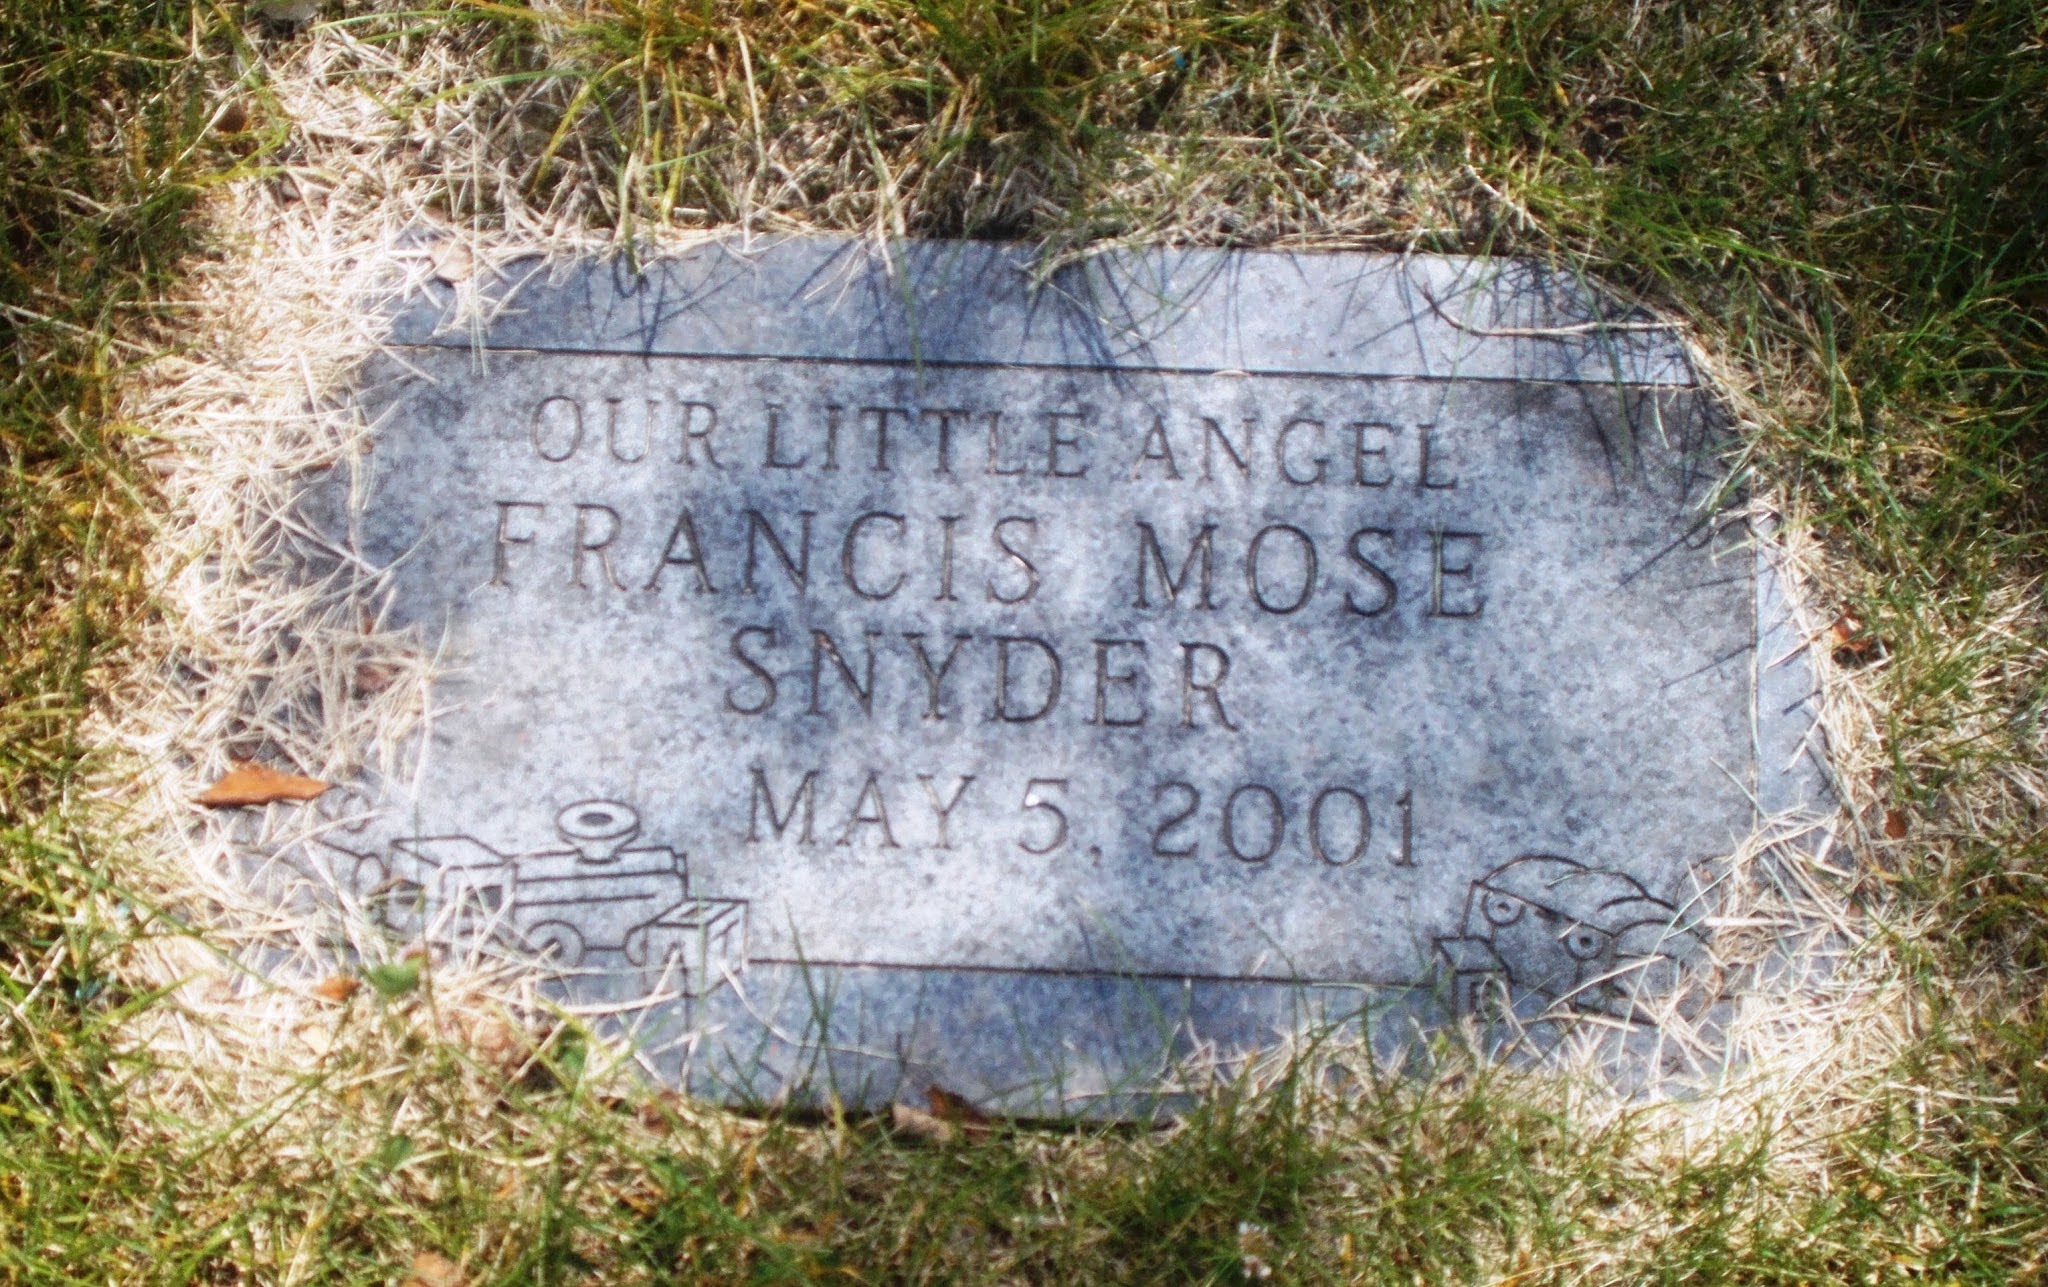 Francis Mose Snyder